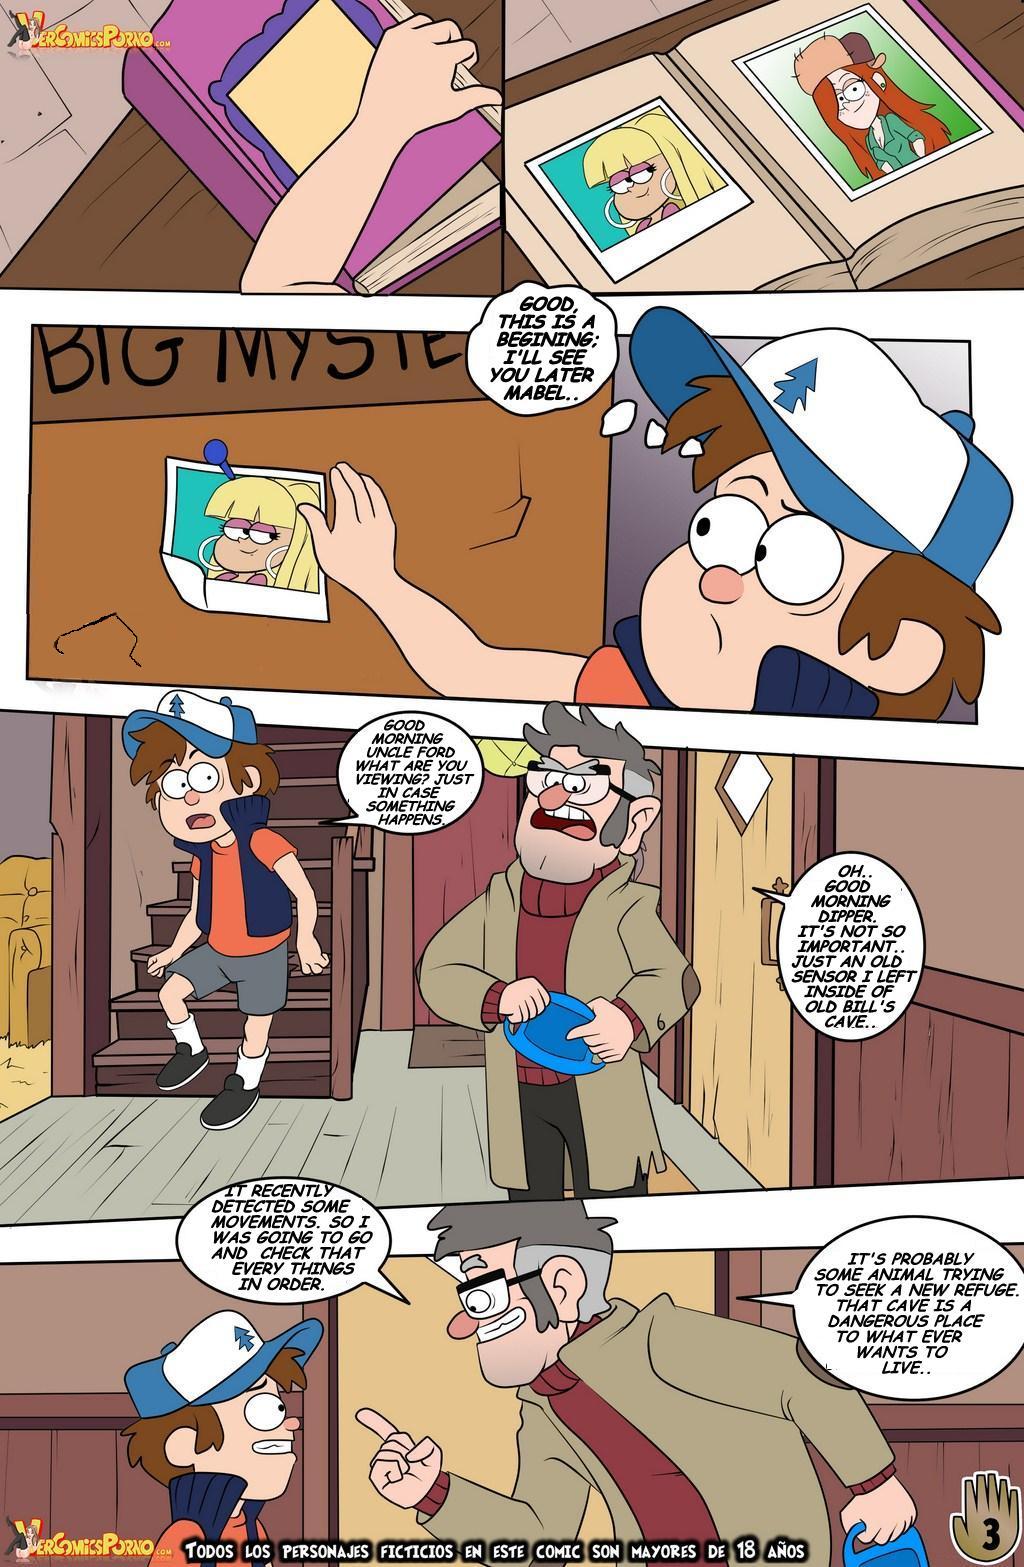 Mable Gravity Falls Porn Shower - Gravity Falls- One Summer of Pleasure Book 2 porn comics 8 muses